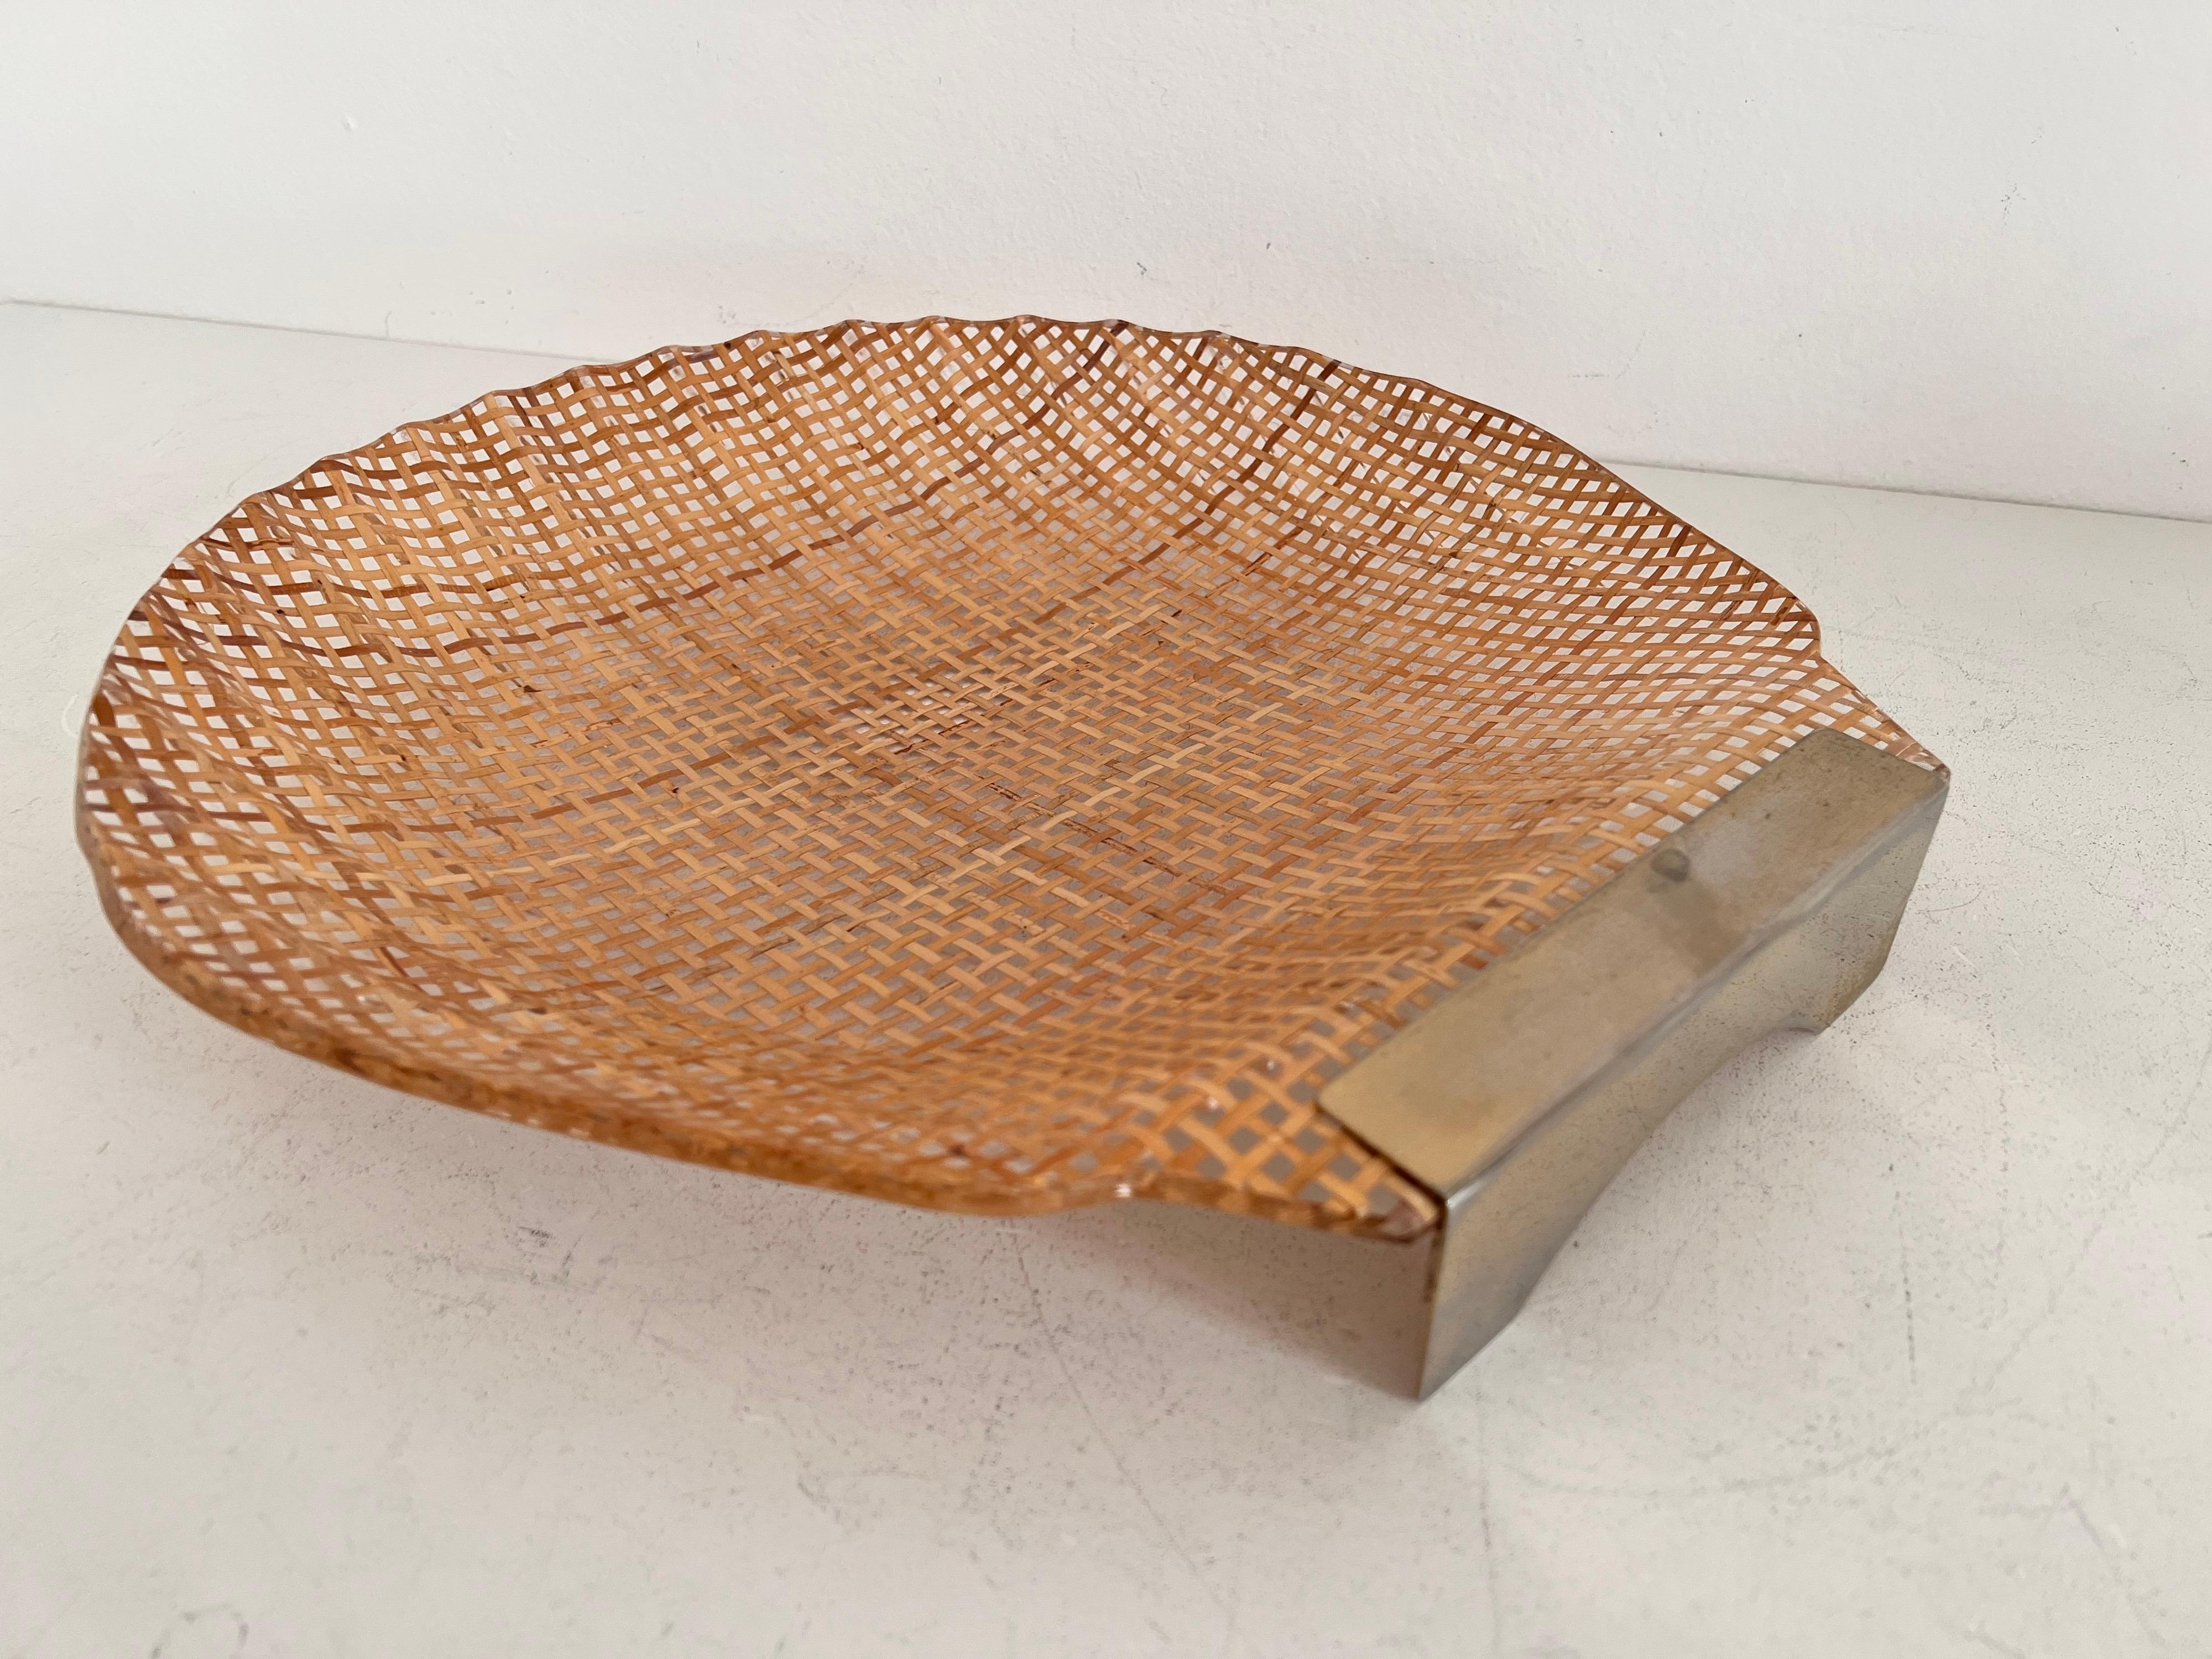 Italian MidCentury Serving Tray in Lucite, Rattan and Brass in Shell Shape, 1970 For Sale 9